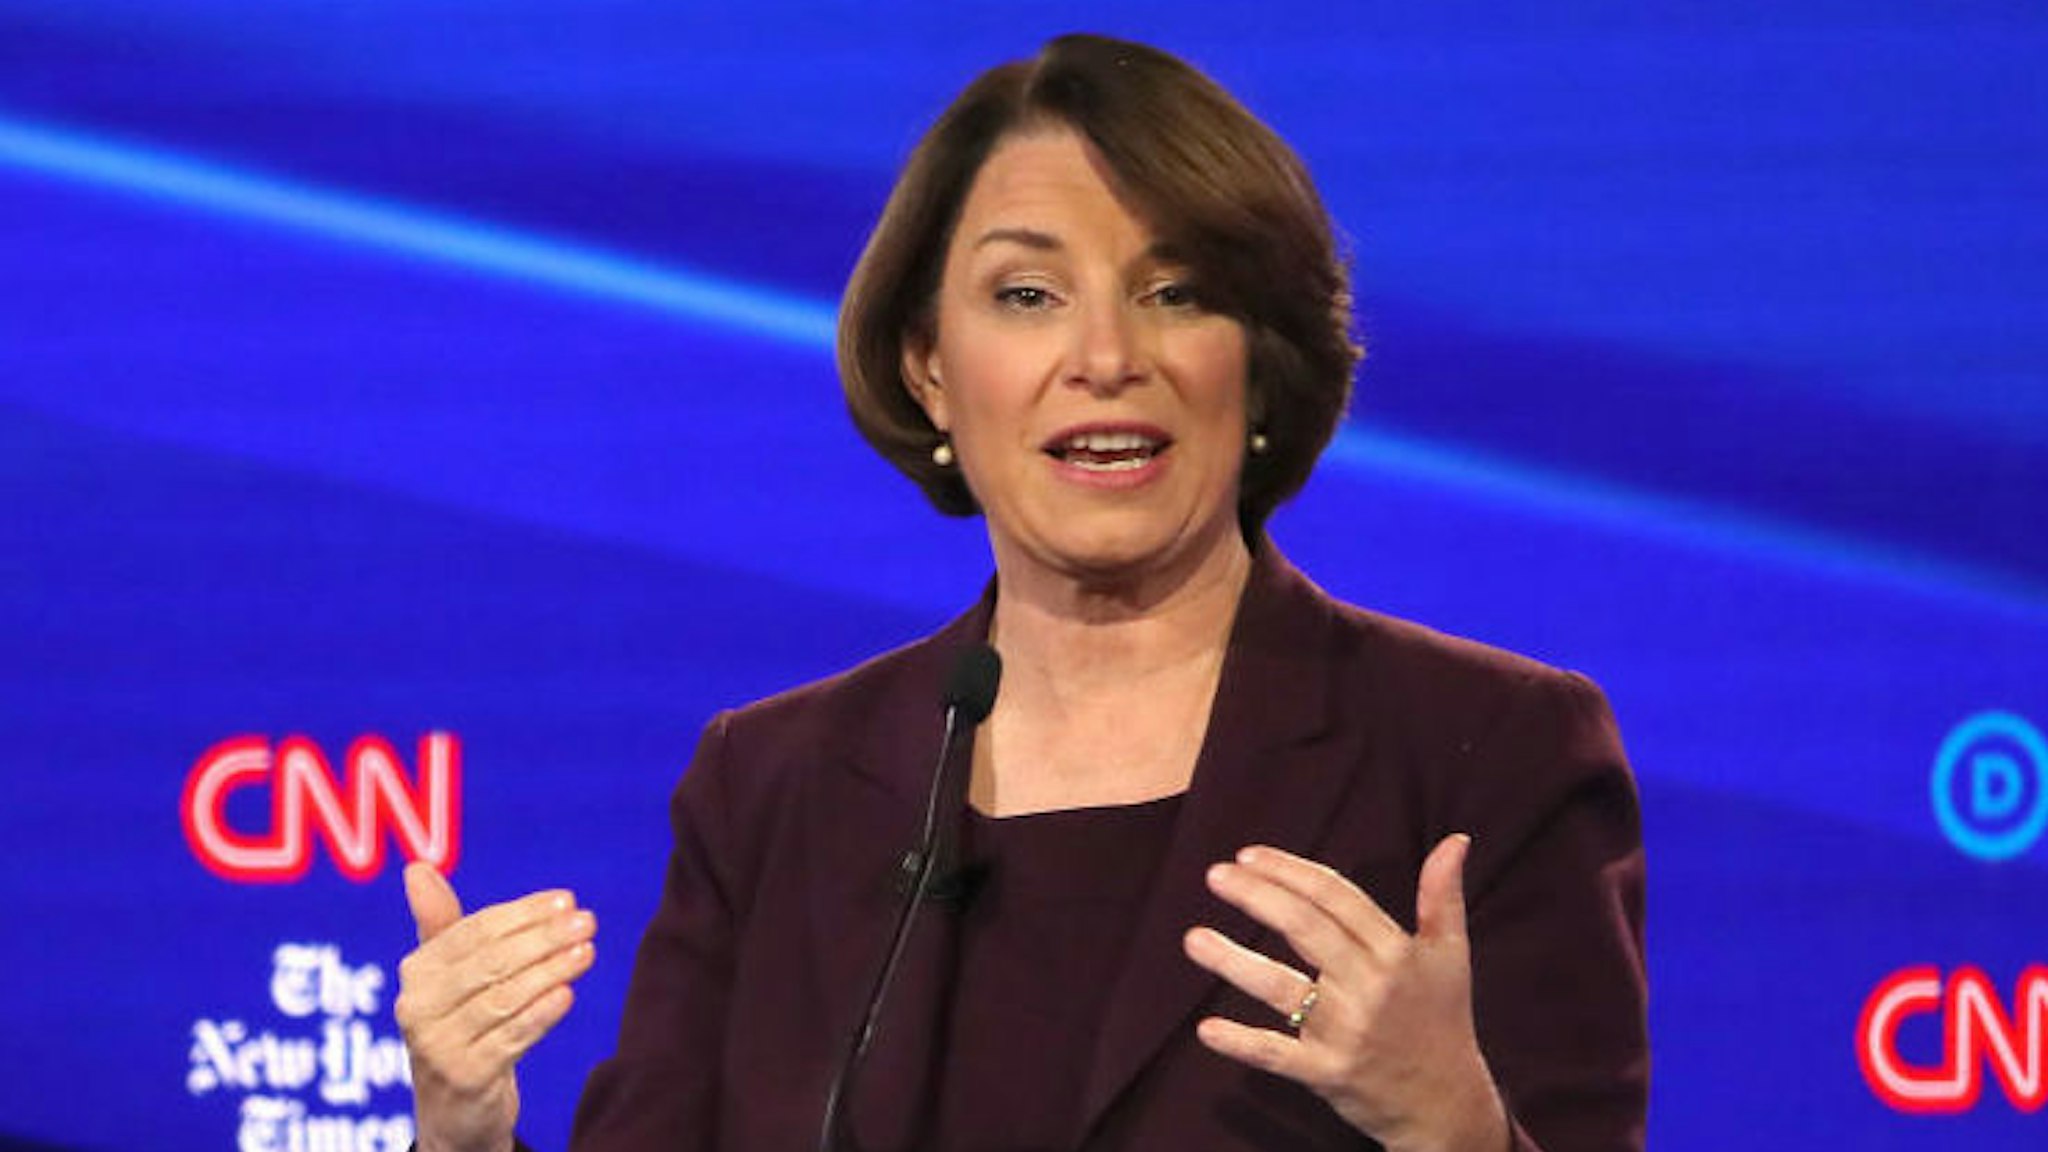 WESTERVILLE, OHIO - OCTOBER 15: Sen. Amy Klobuchar (D-MN) speaks during the Democratic Presidential Debate at Otterbein University on October 15, 2019 in Westerville, Ohio. A record 12 presidential hopefuls are participating in the debate hosted by CNN and The New York Times.